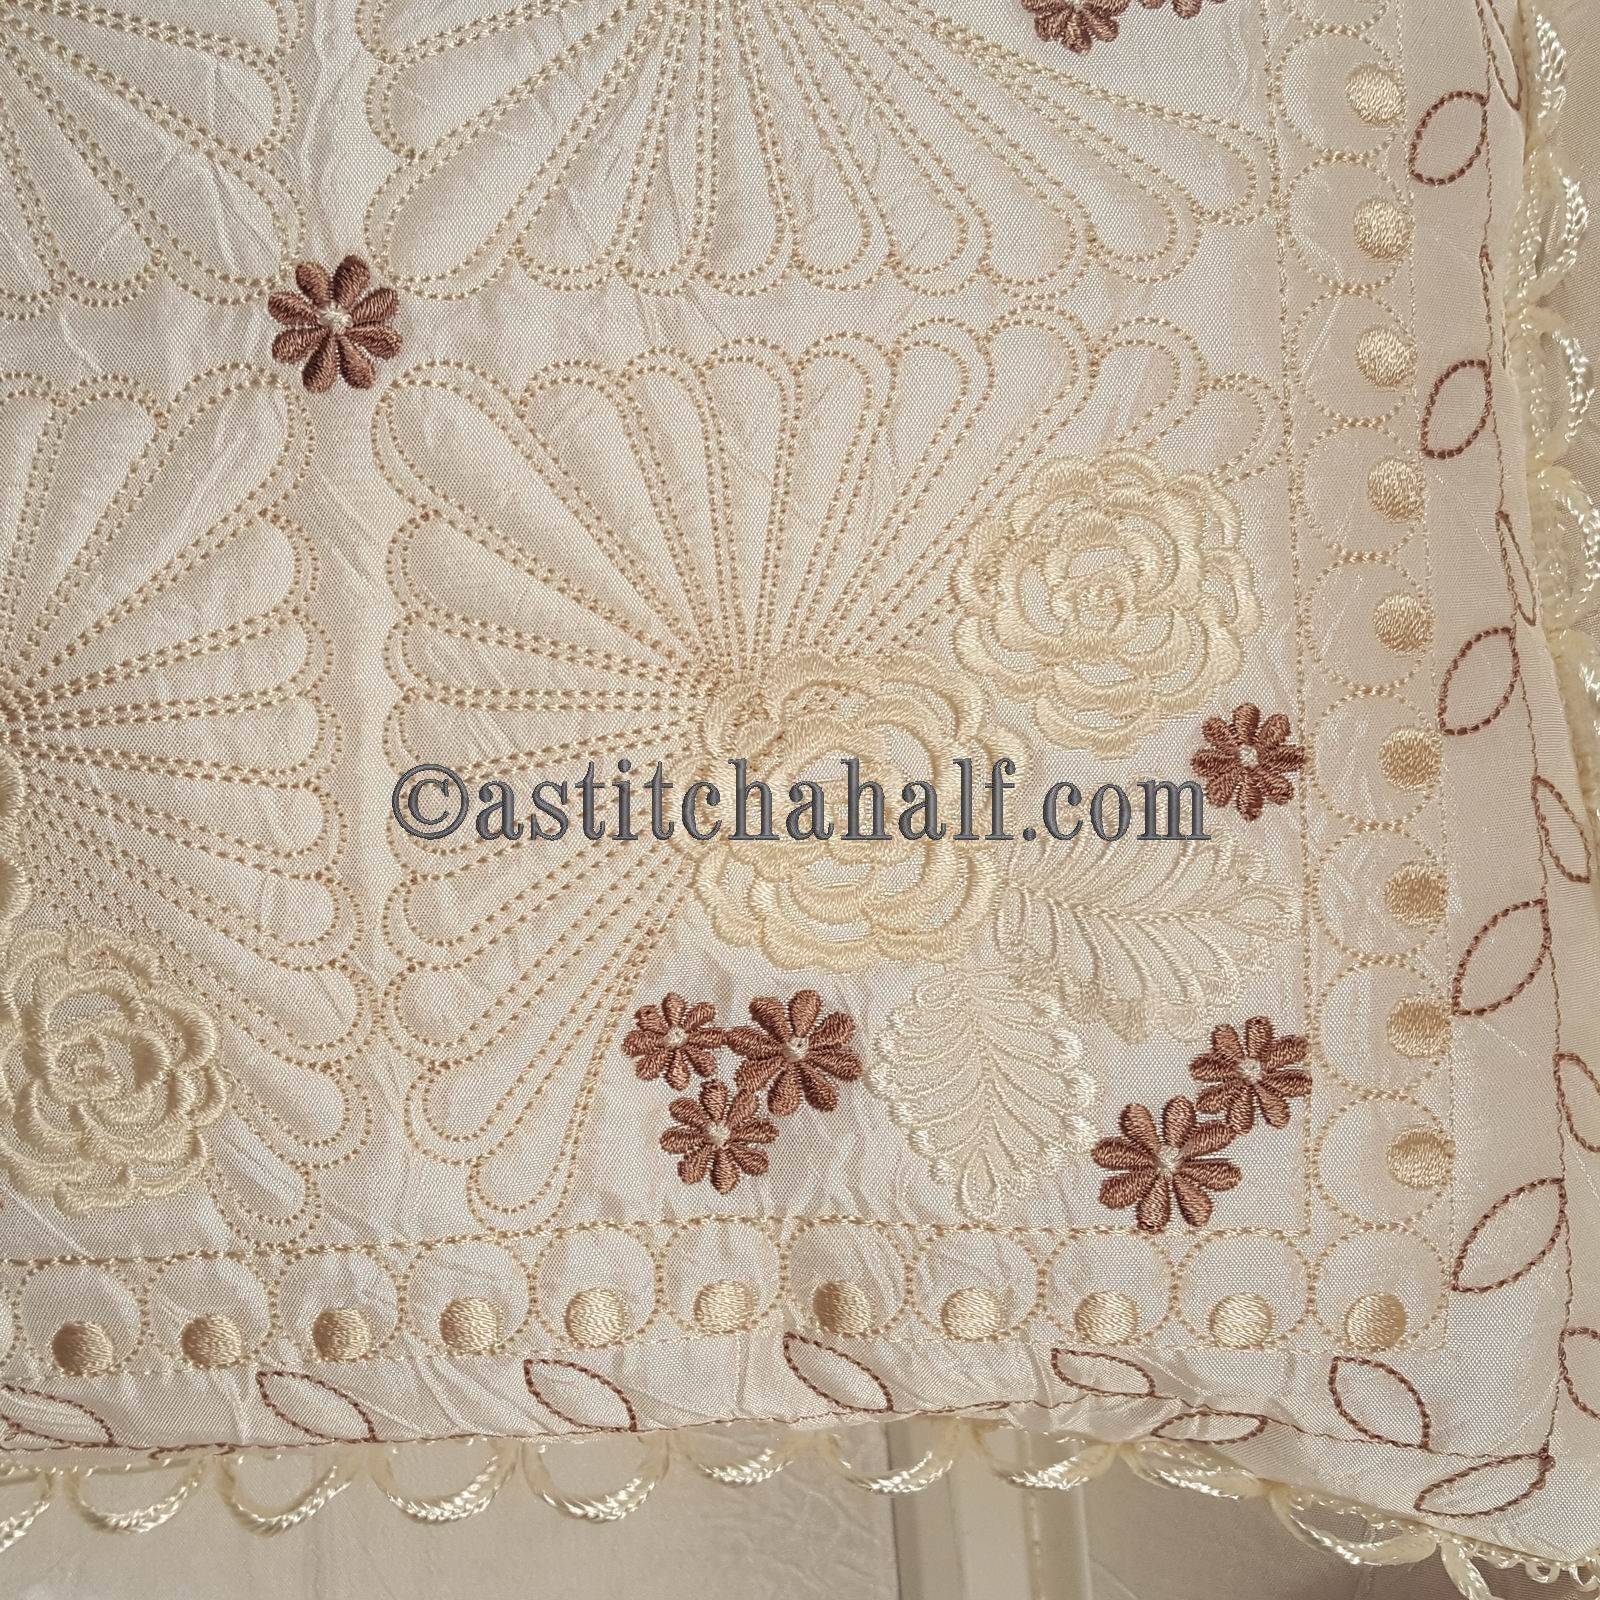 Feather Spring Quilt Combo - aStitch aHalf